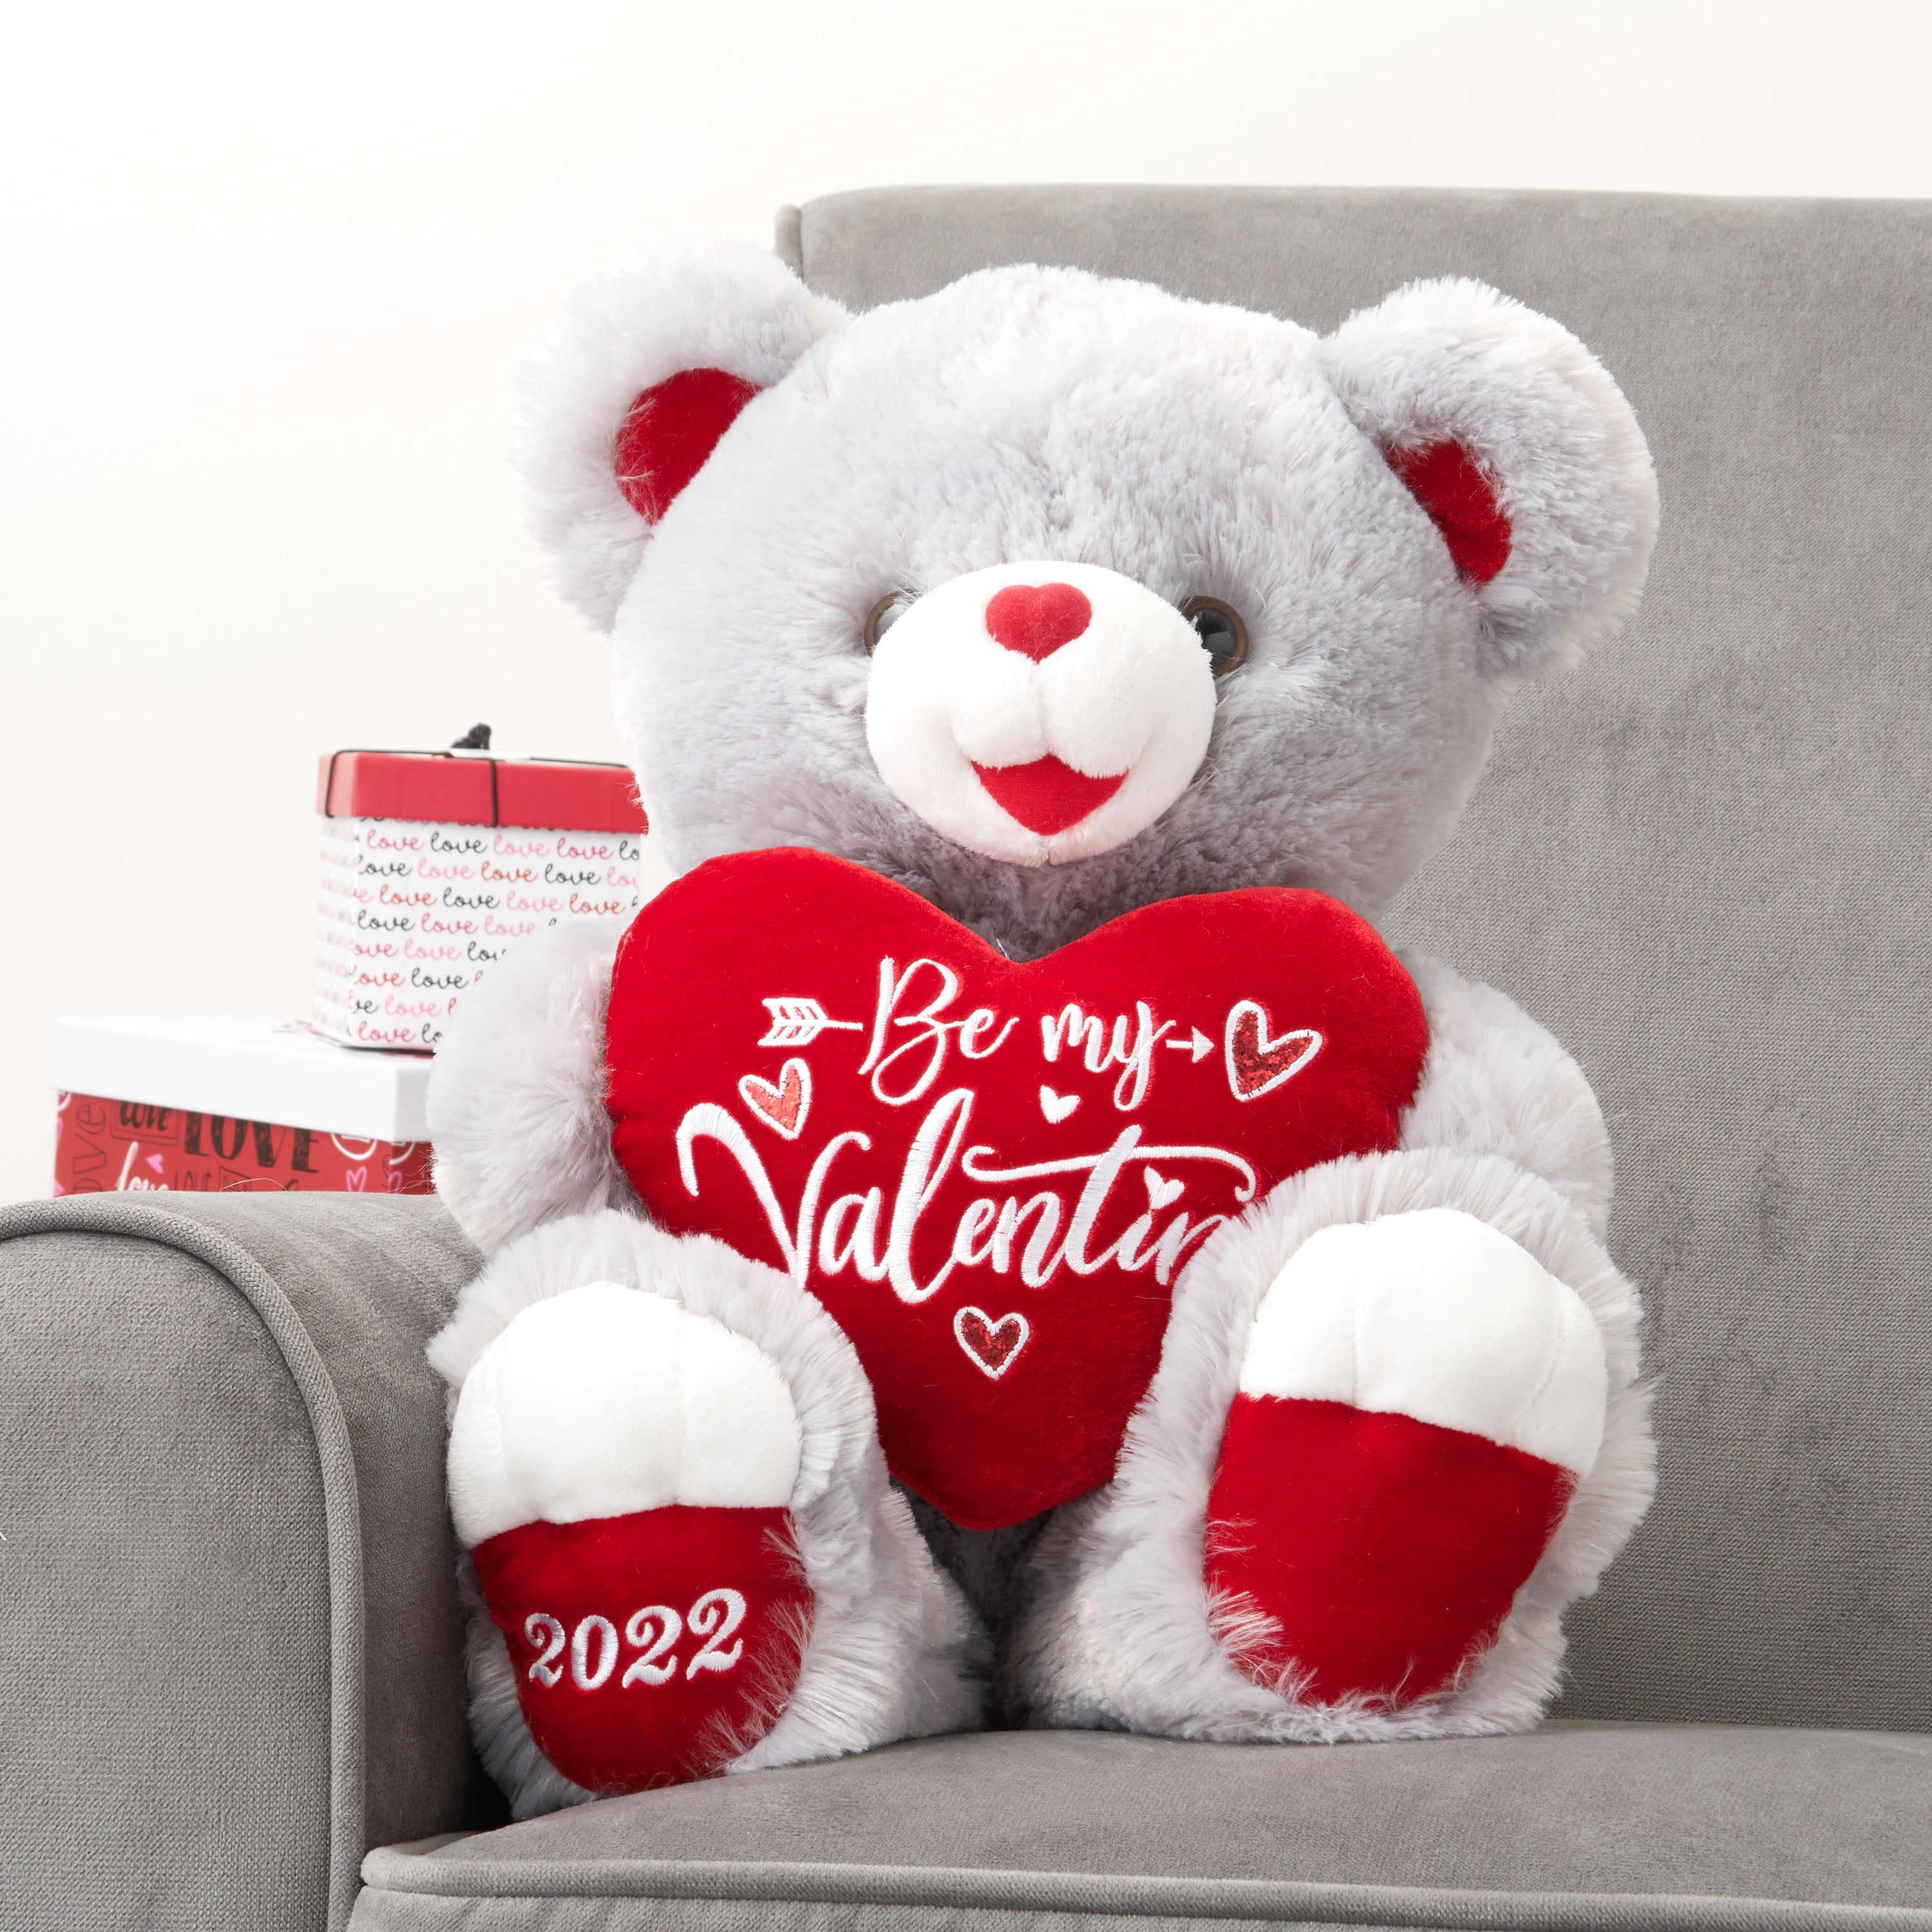 WAY TO CELEBRATE VALENTINE'S DAY Brown TEDDY BEAR DATED 2022 Ships Fast 